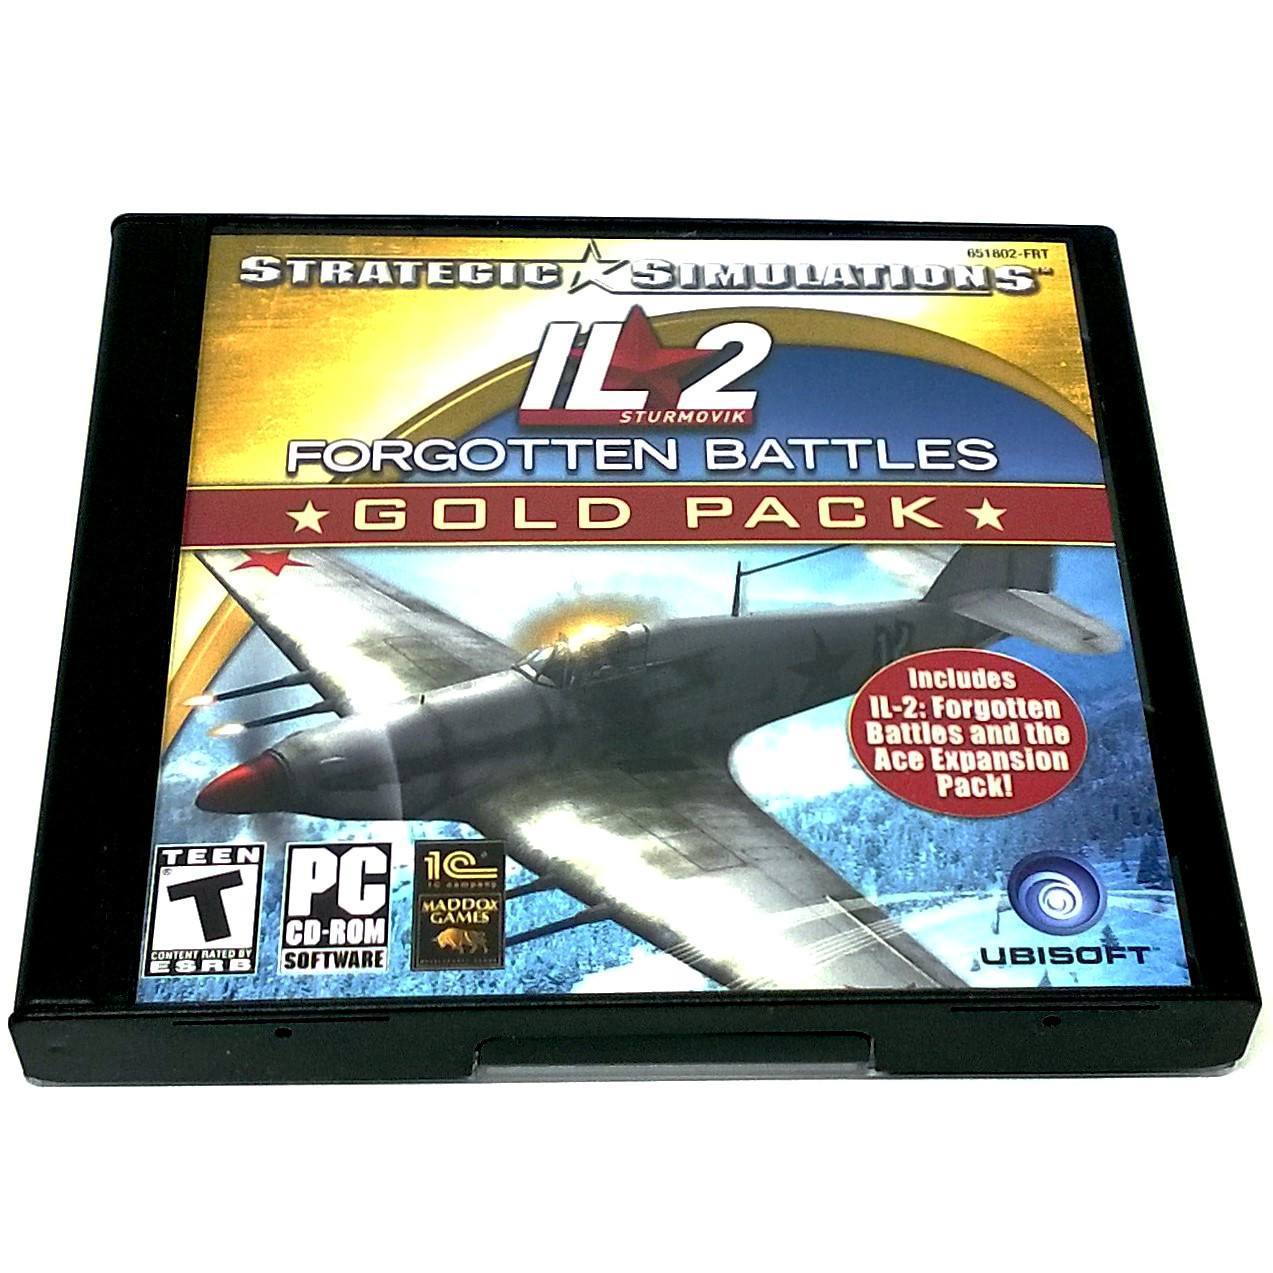 IL-2 Sturmovik: Forgotten Battles (Gold Pack Edition) for PC CD-ROM - Front of case